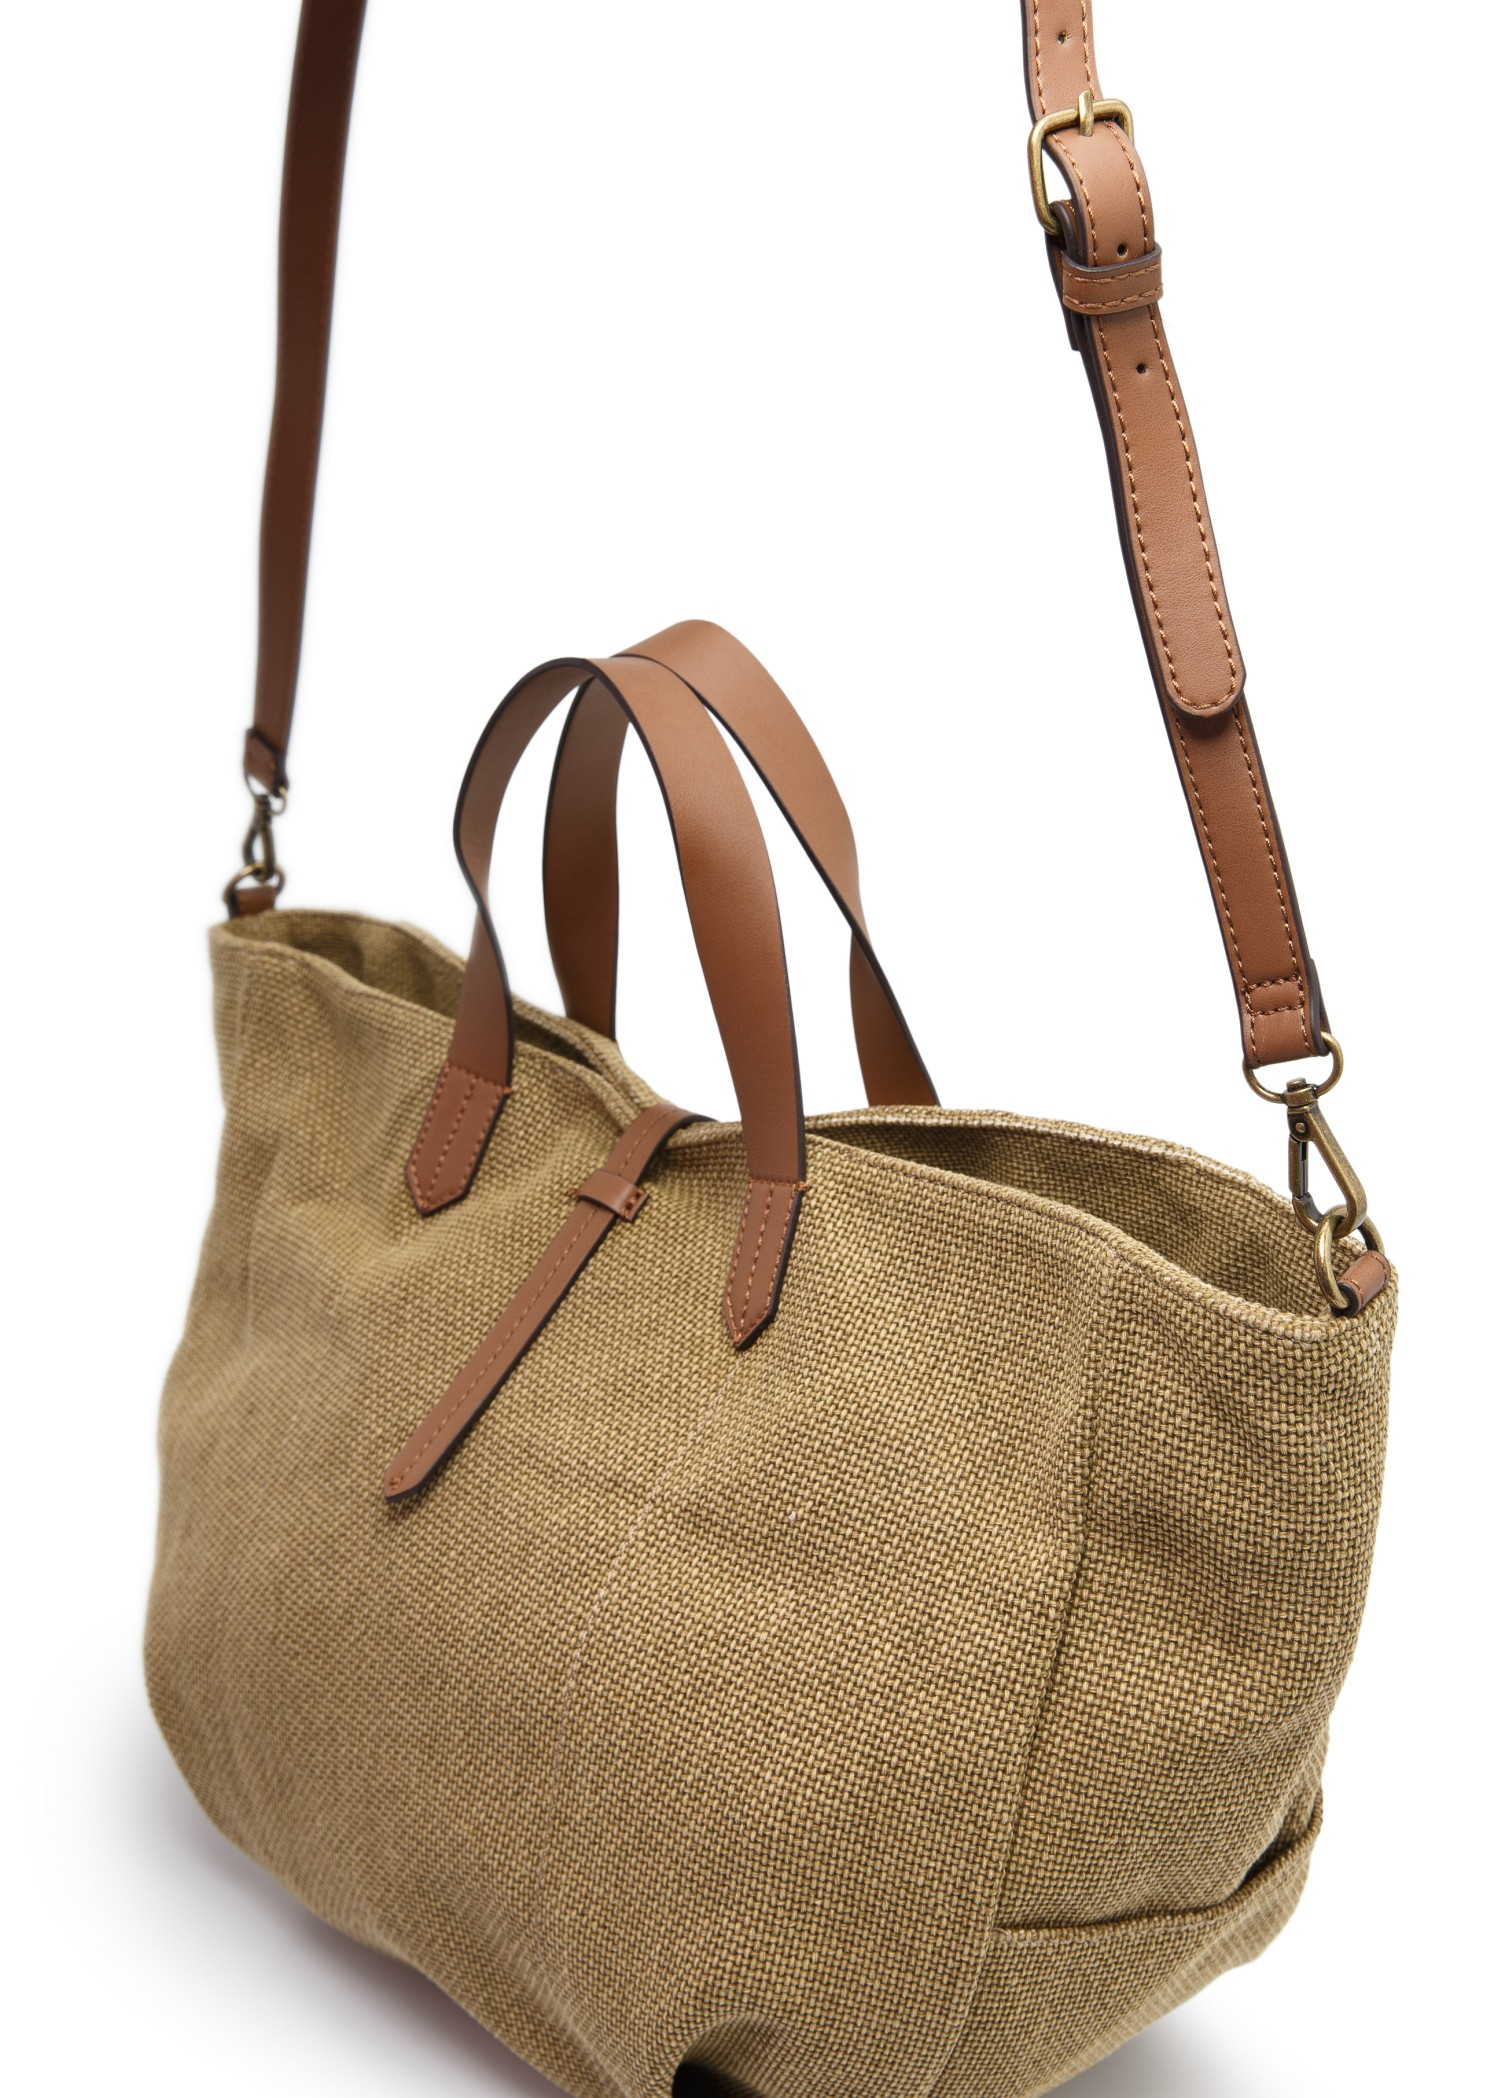 Lyst - Mango Canvas Tote Bag in Natural